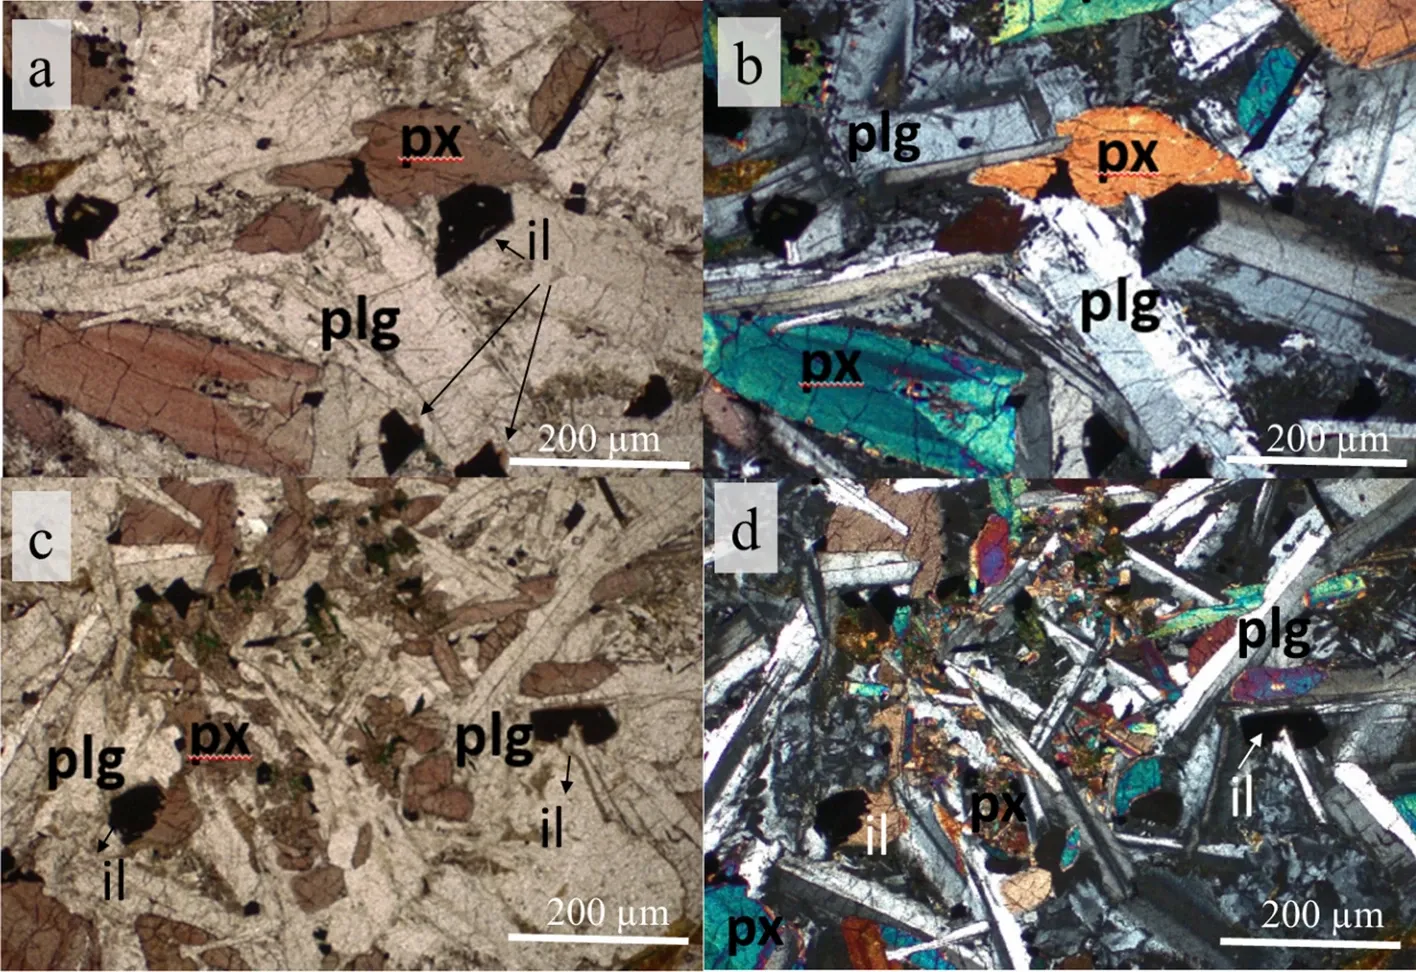 Fig 1: Petrographic photomicrographs of BS1 rock sample under plane polarized (a, c) and cross polarized light (b, d). px: clinopyroxene, plg: plagioclase, il: ilmenite